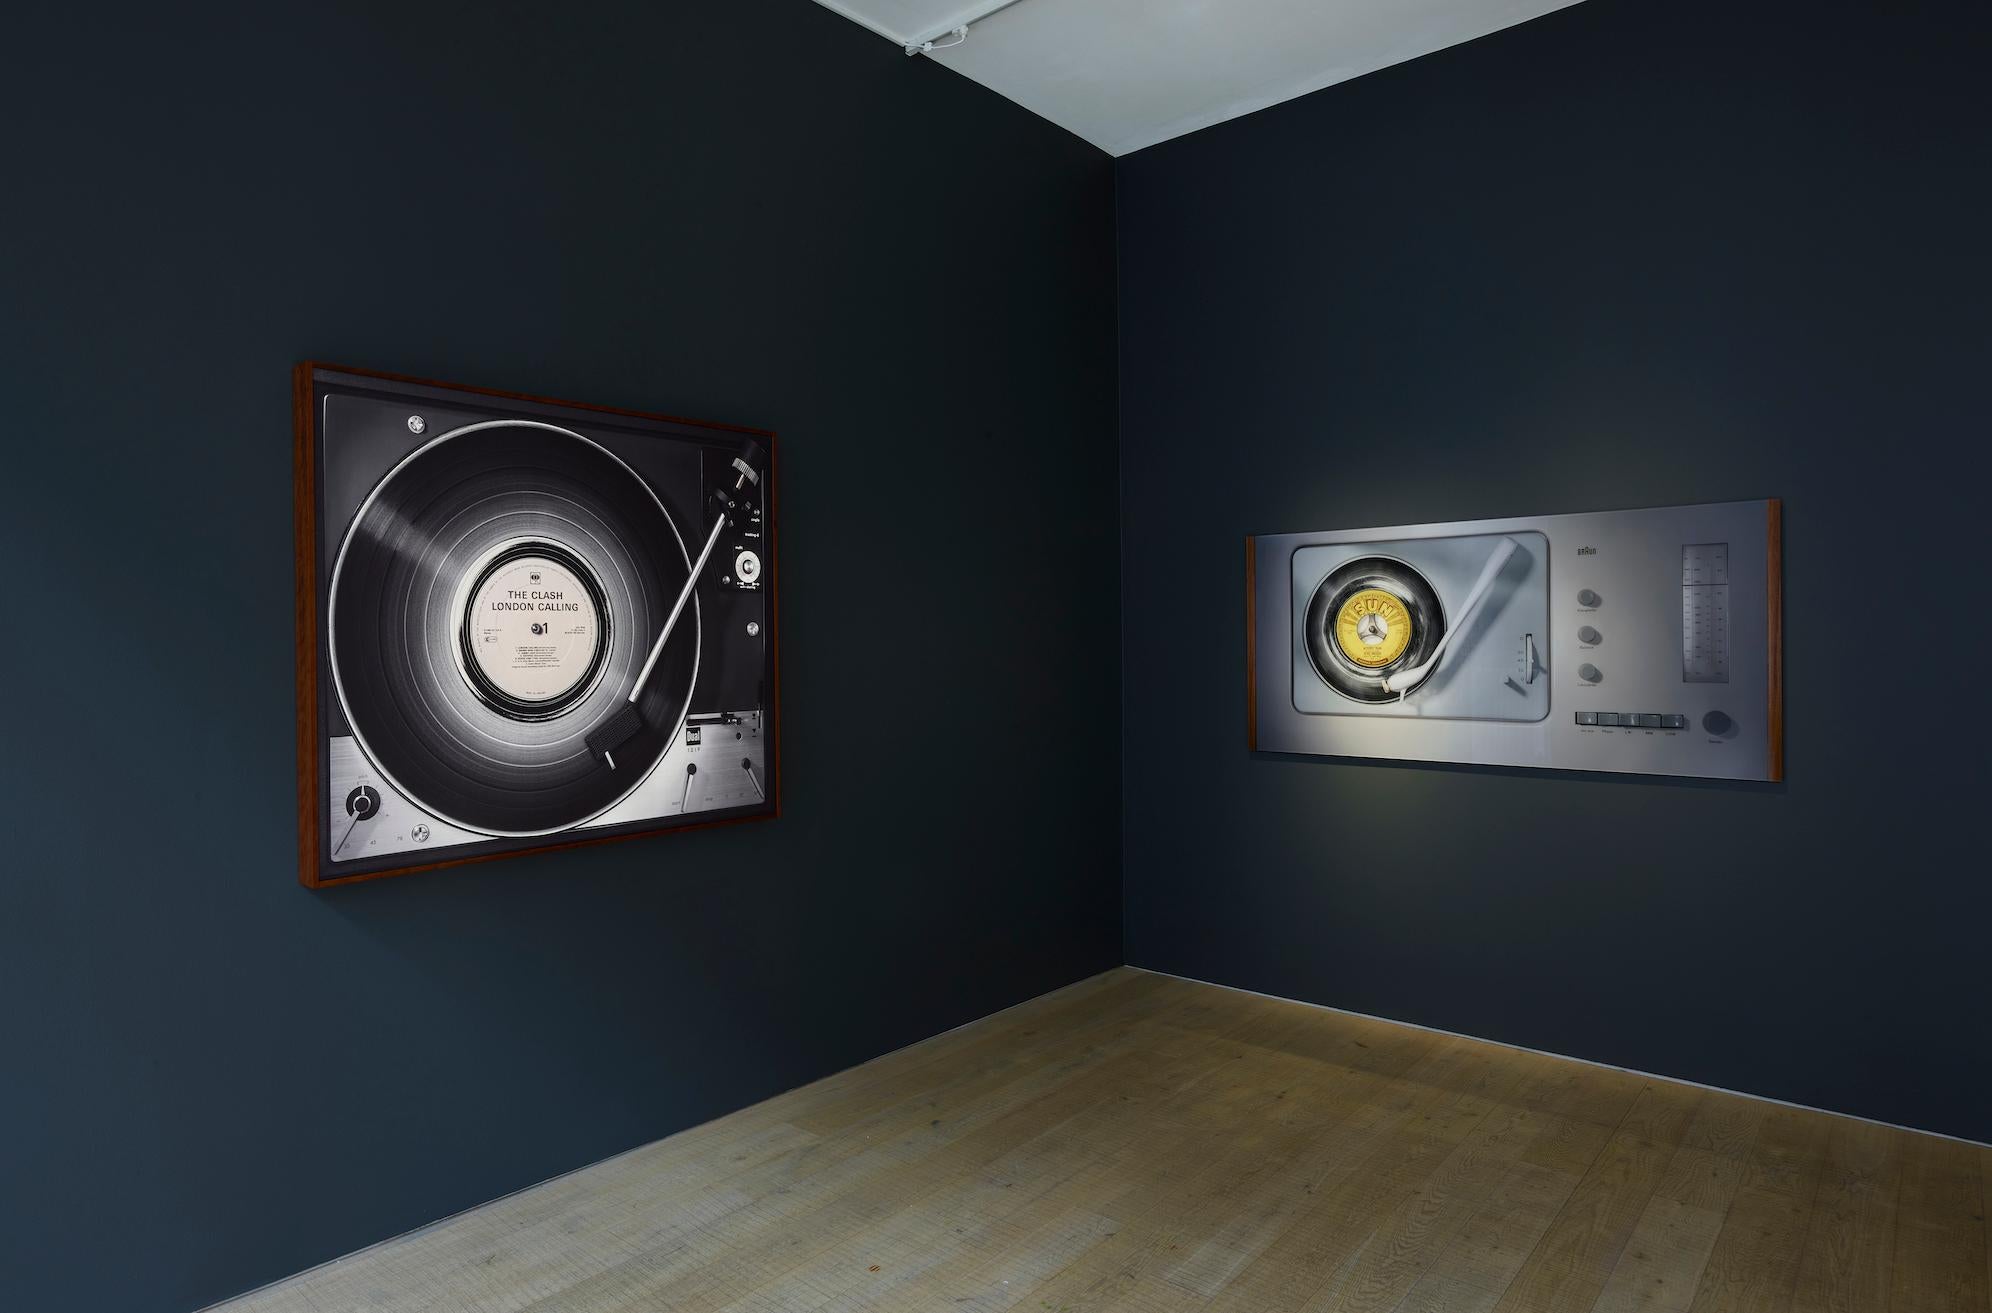 Edition of 3
Mounted on Plexiglas
Framed

Kai Schäfer is an acclaimed German photographer with a passion for vinyl records and iconic turntables. The World Records series celebrates some of the very best and most distinctive albums in music history,